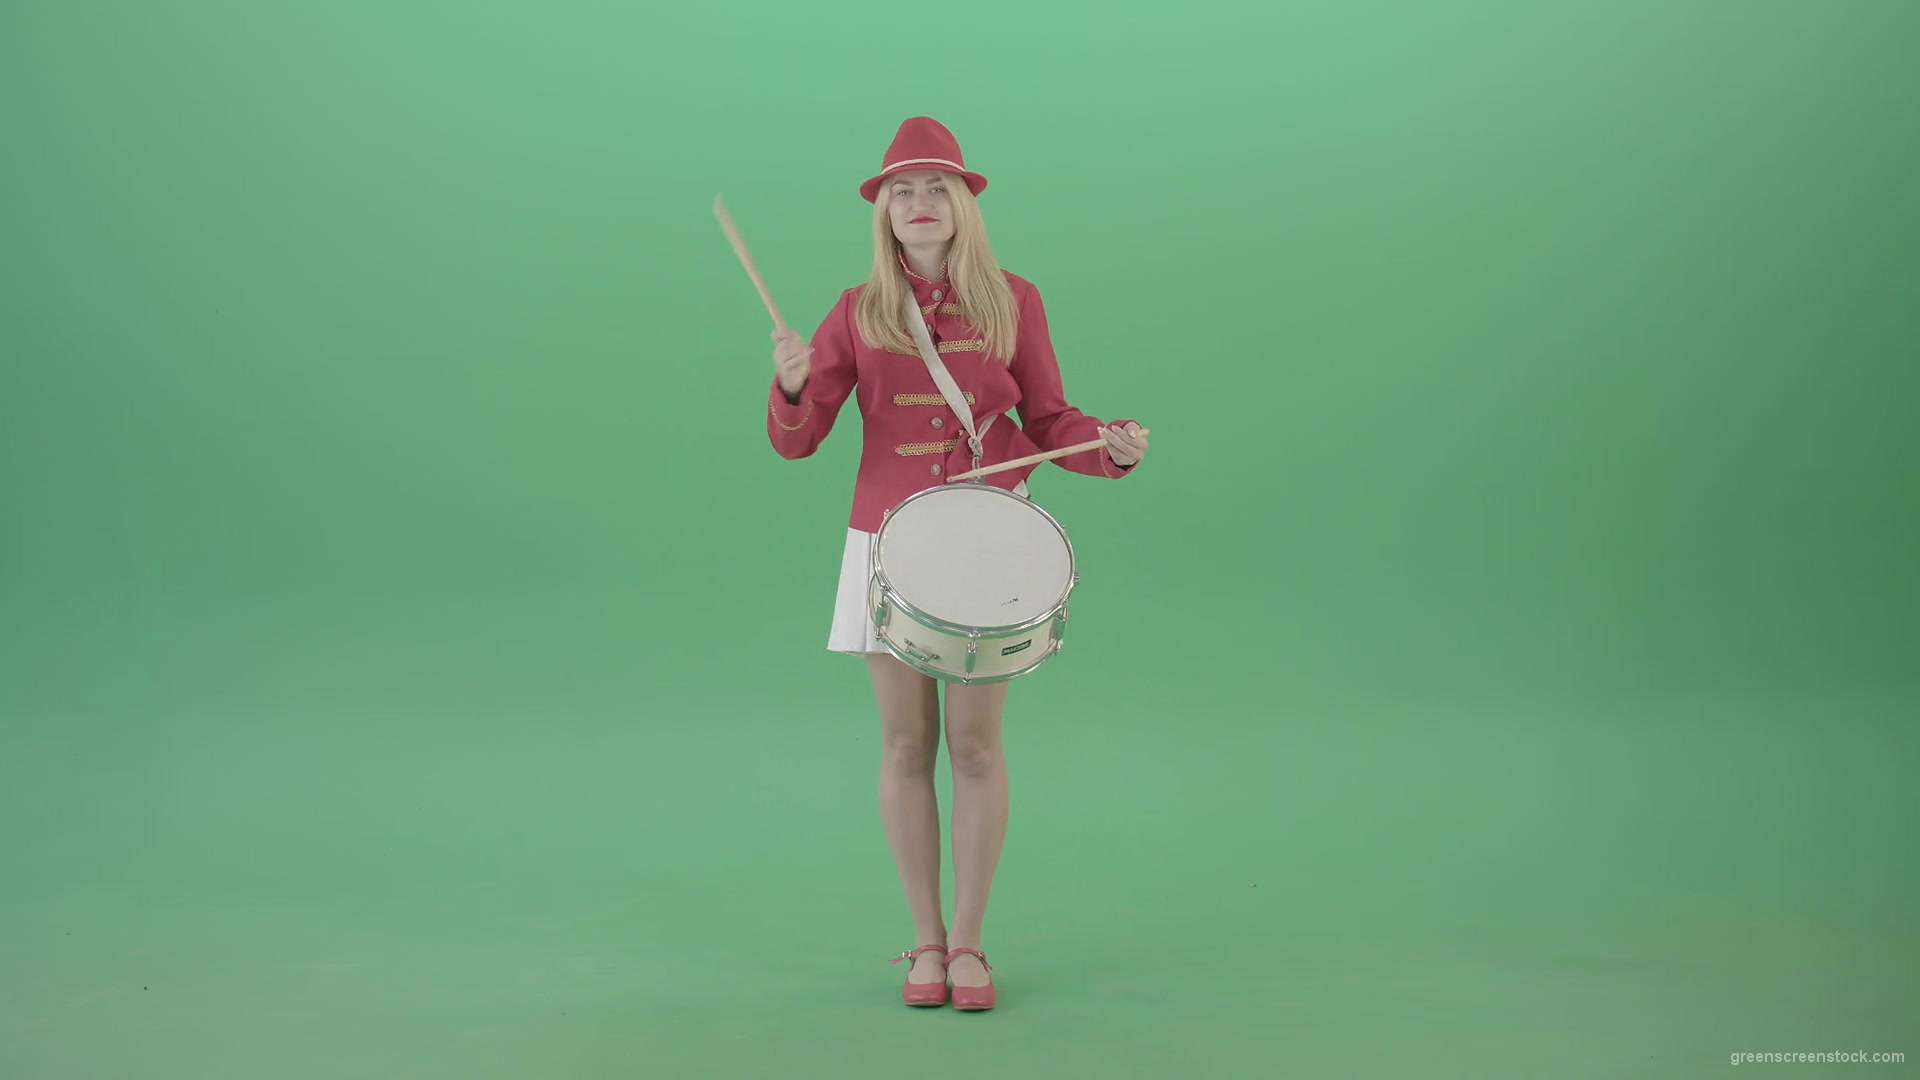 Girl-in-18-Century-military-uniform-play-snare-drum-isolated-on-green-screen-4K-Video-Footage-1920_006 Green Screen Stock